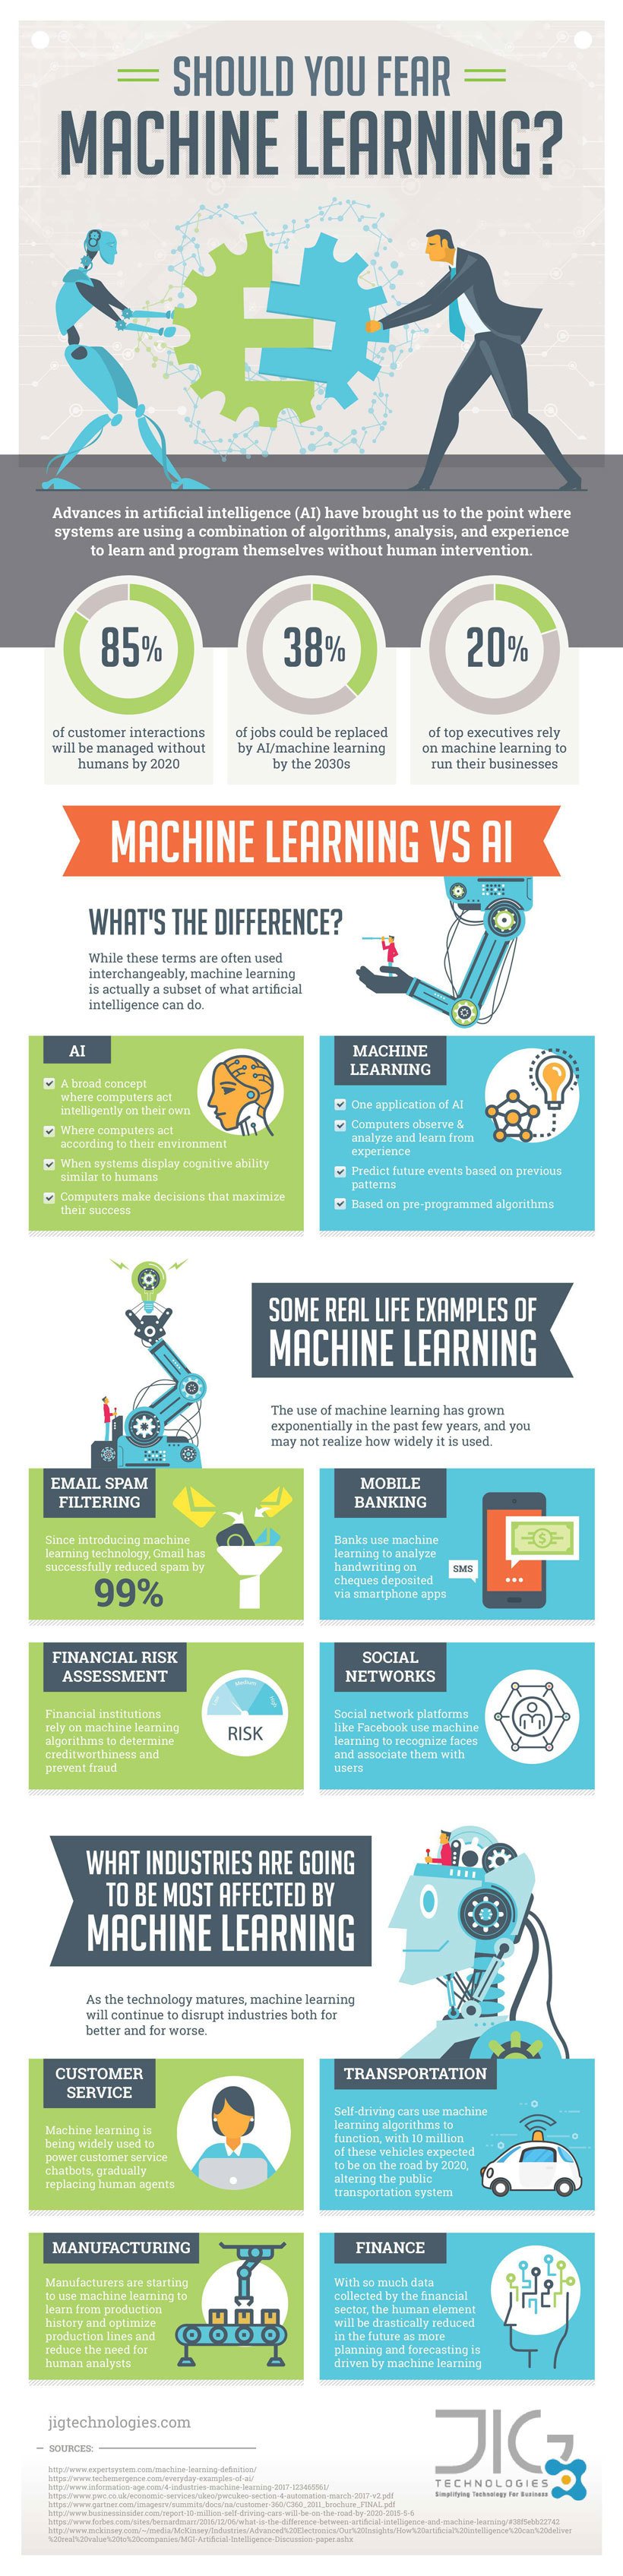 Should You Fear Machine Learning? Infographic